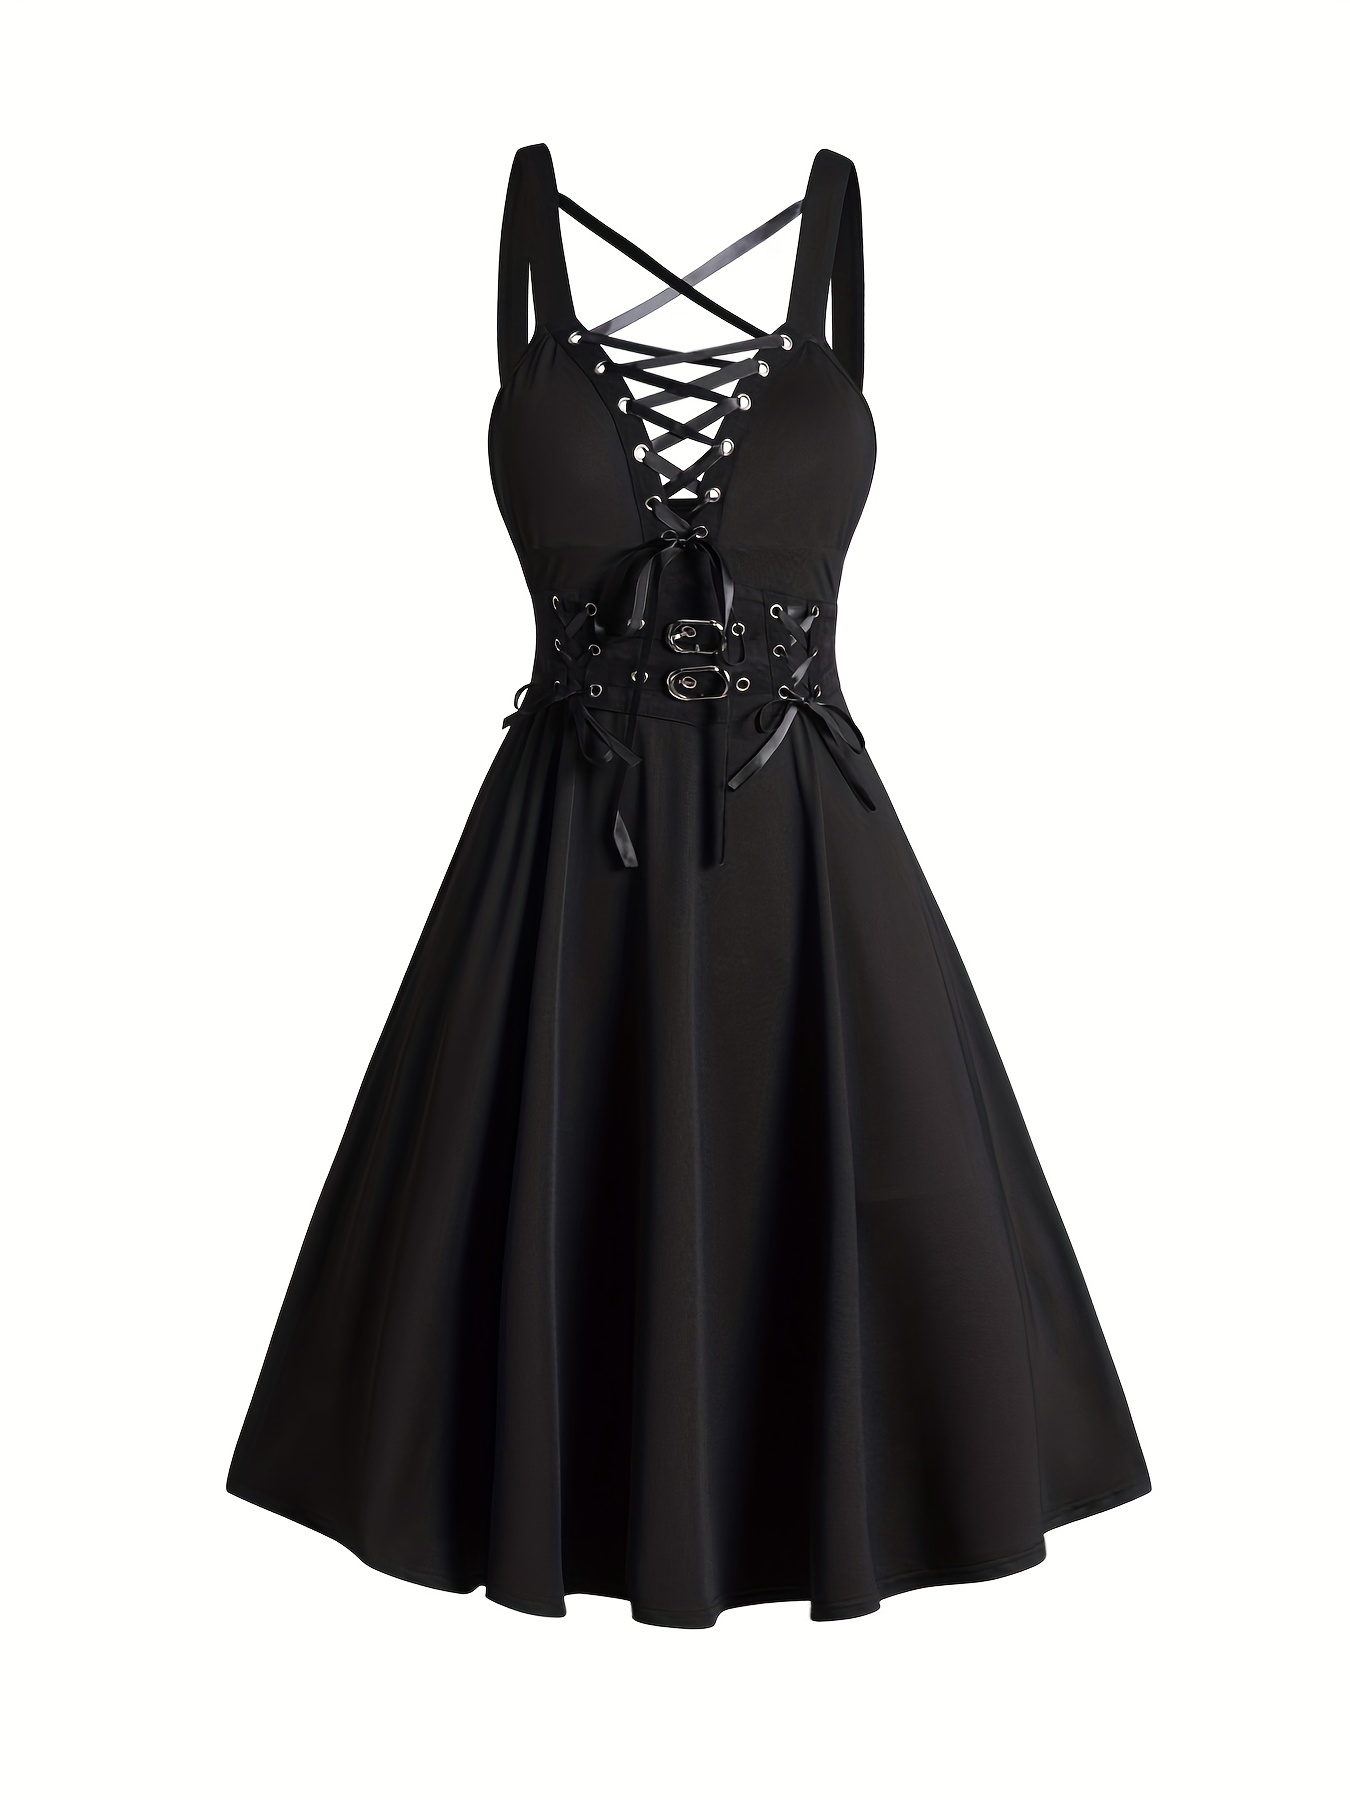 Womens Gothic Dress with Corset Sexy Sleeveless Halter Dress Lace